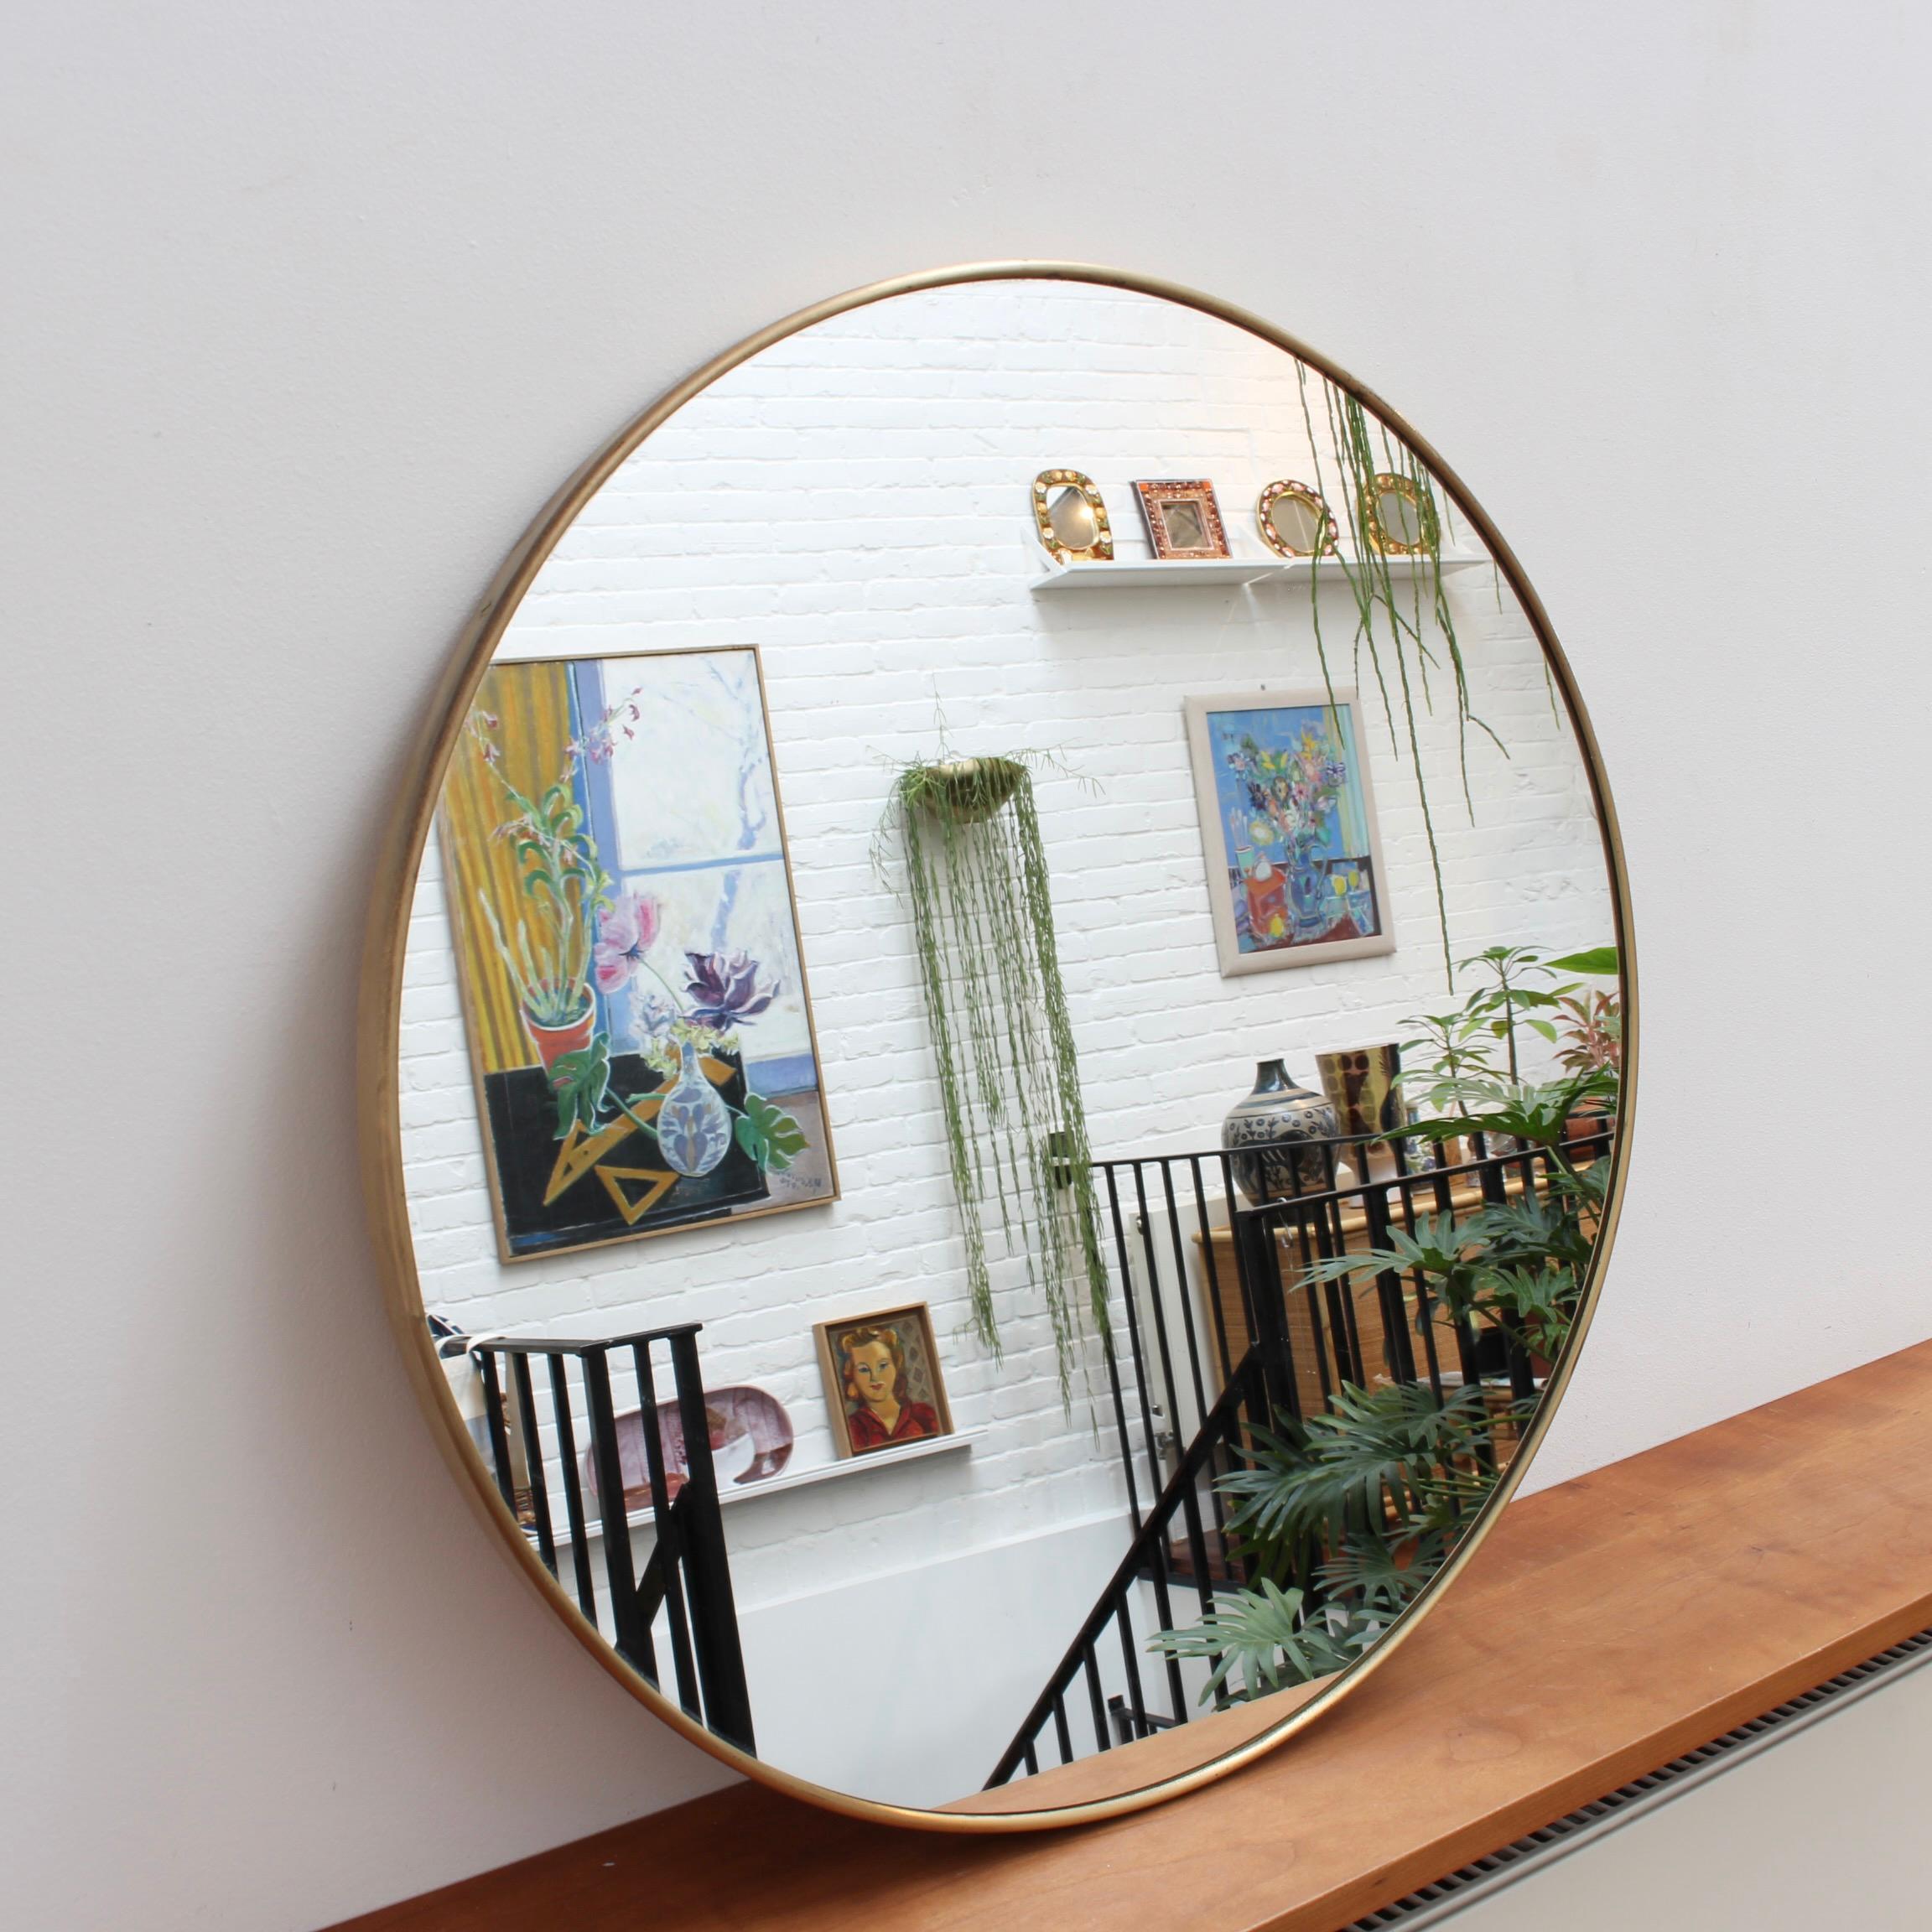 Mid-century Italian wall mirror with brass frame (circa 1950s). The mirror is perfectly round with a characterful brass frame. It is distinctive in a modern Gio Ponti style. The piece is in good vintage condition with a characterful patina on the